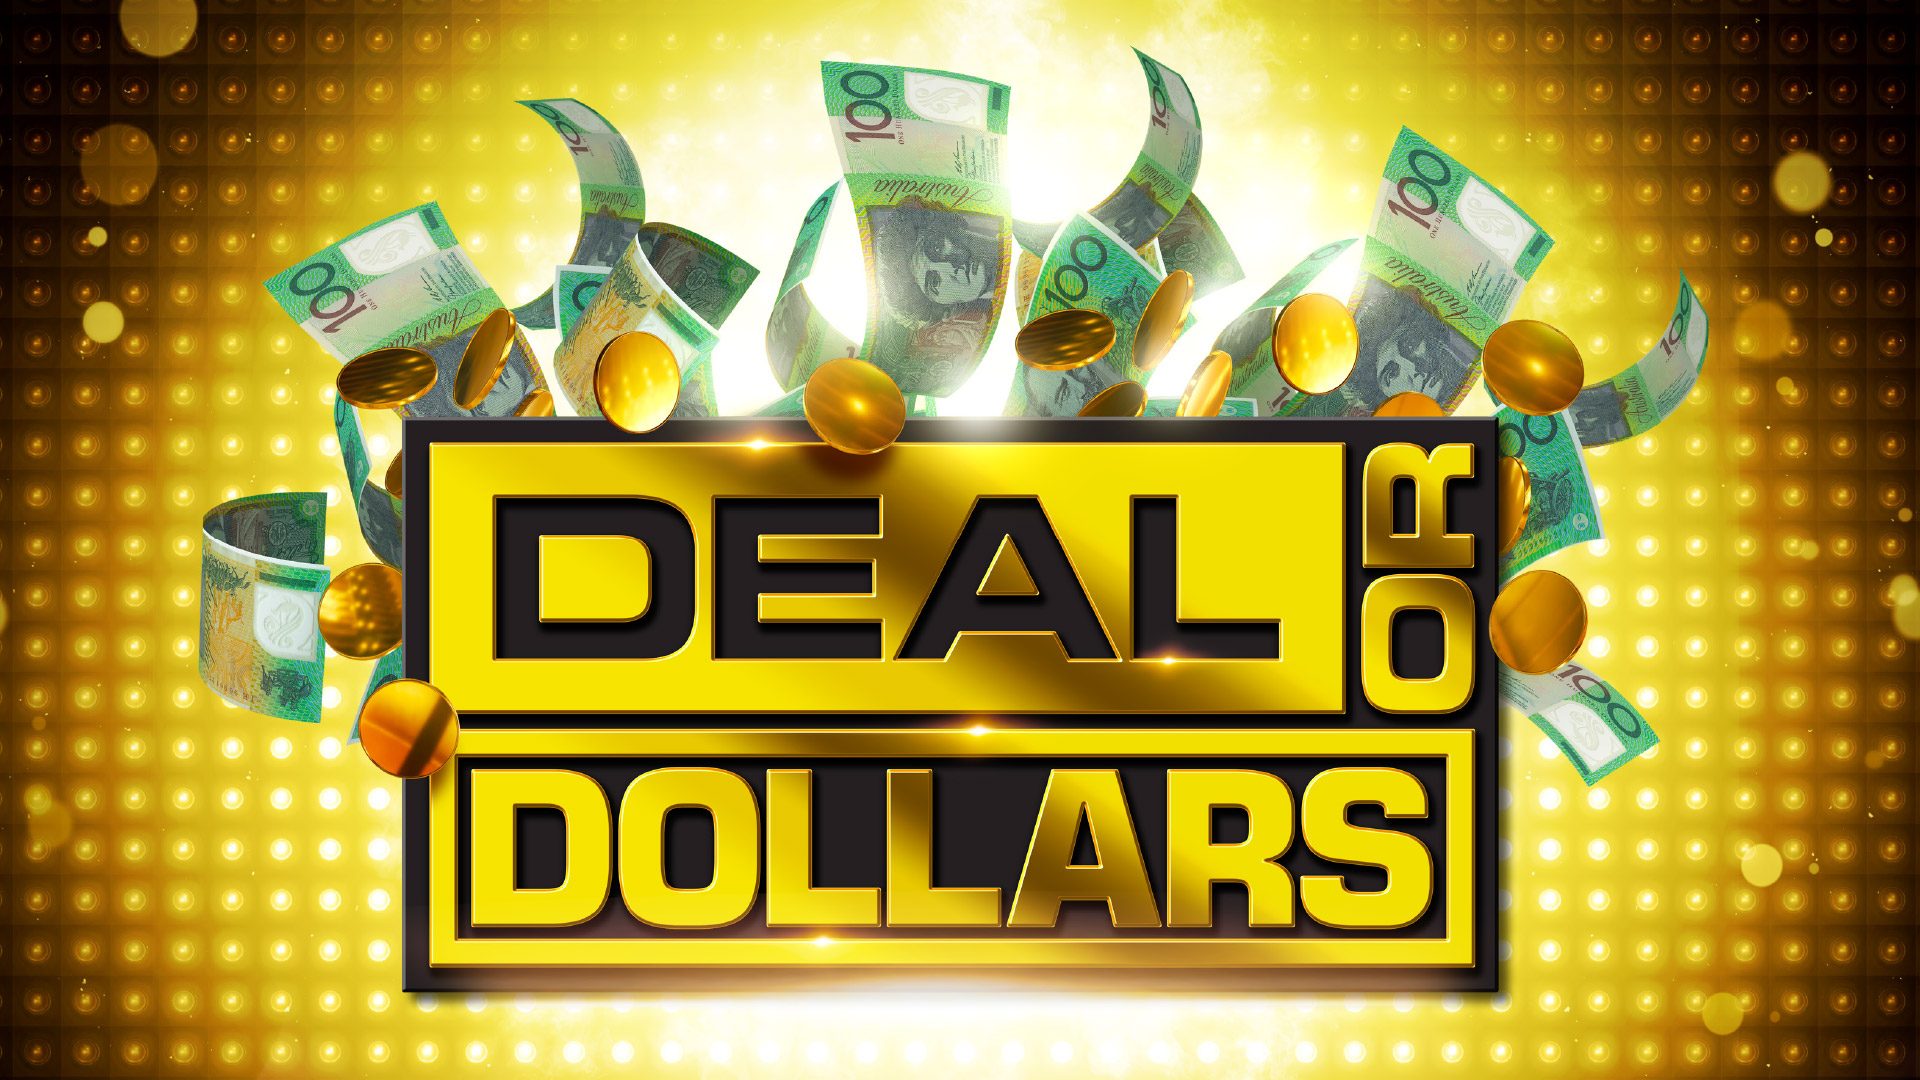 Deal or Dollars